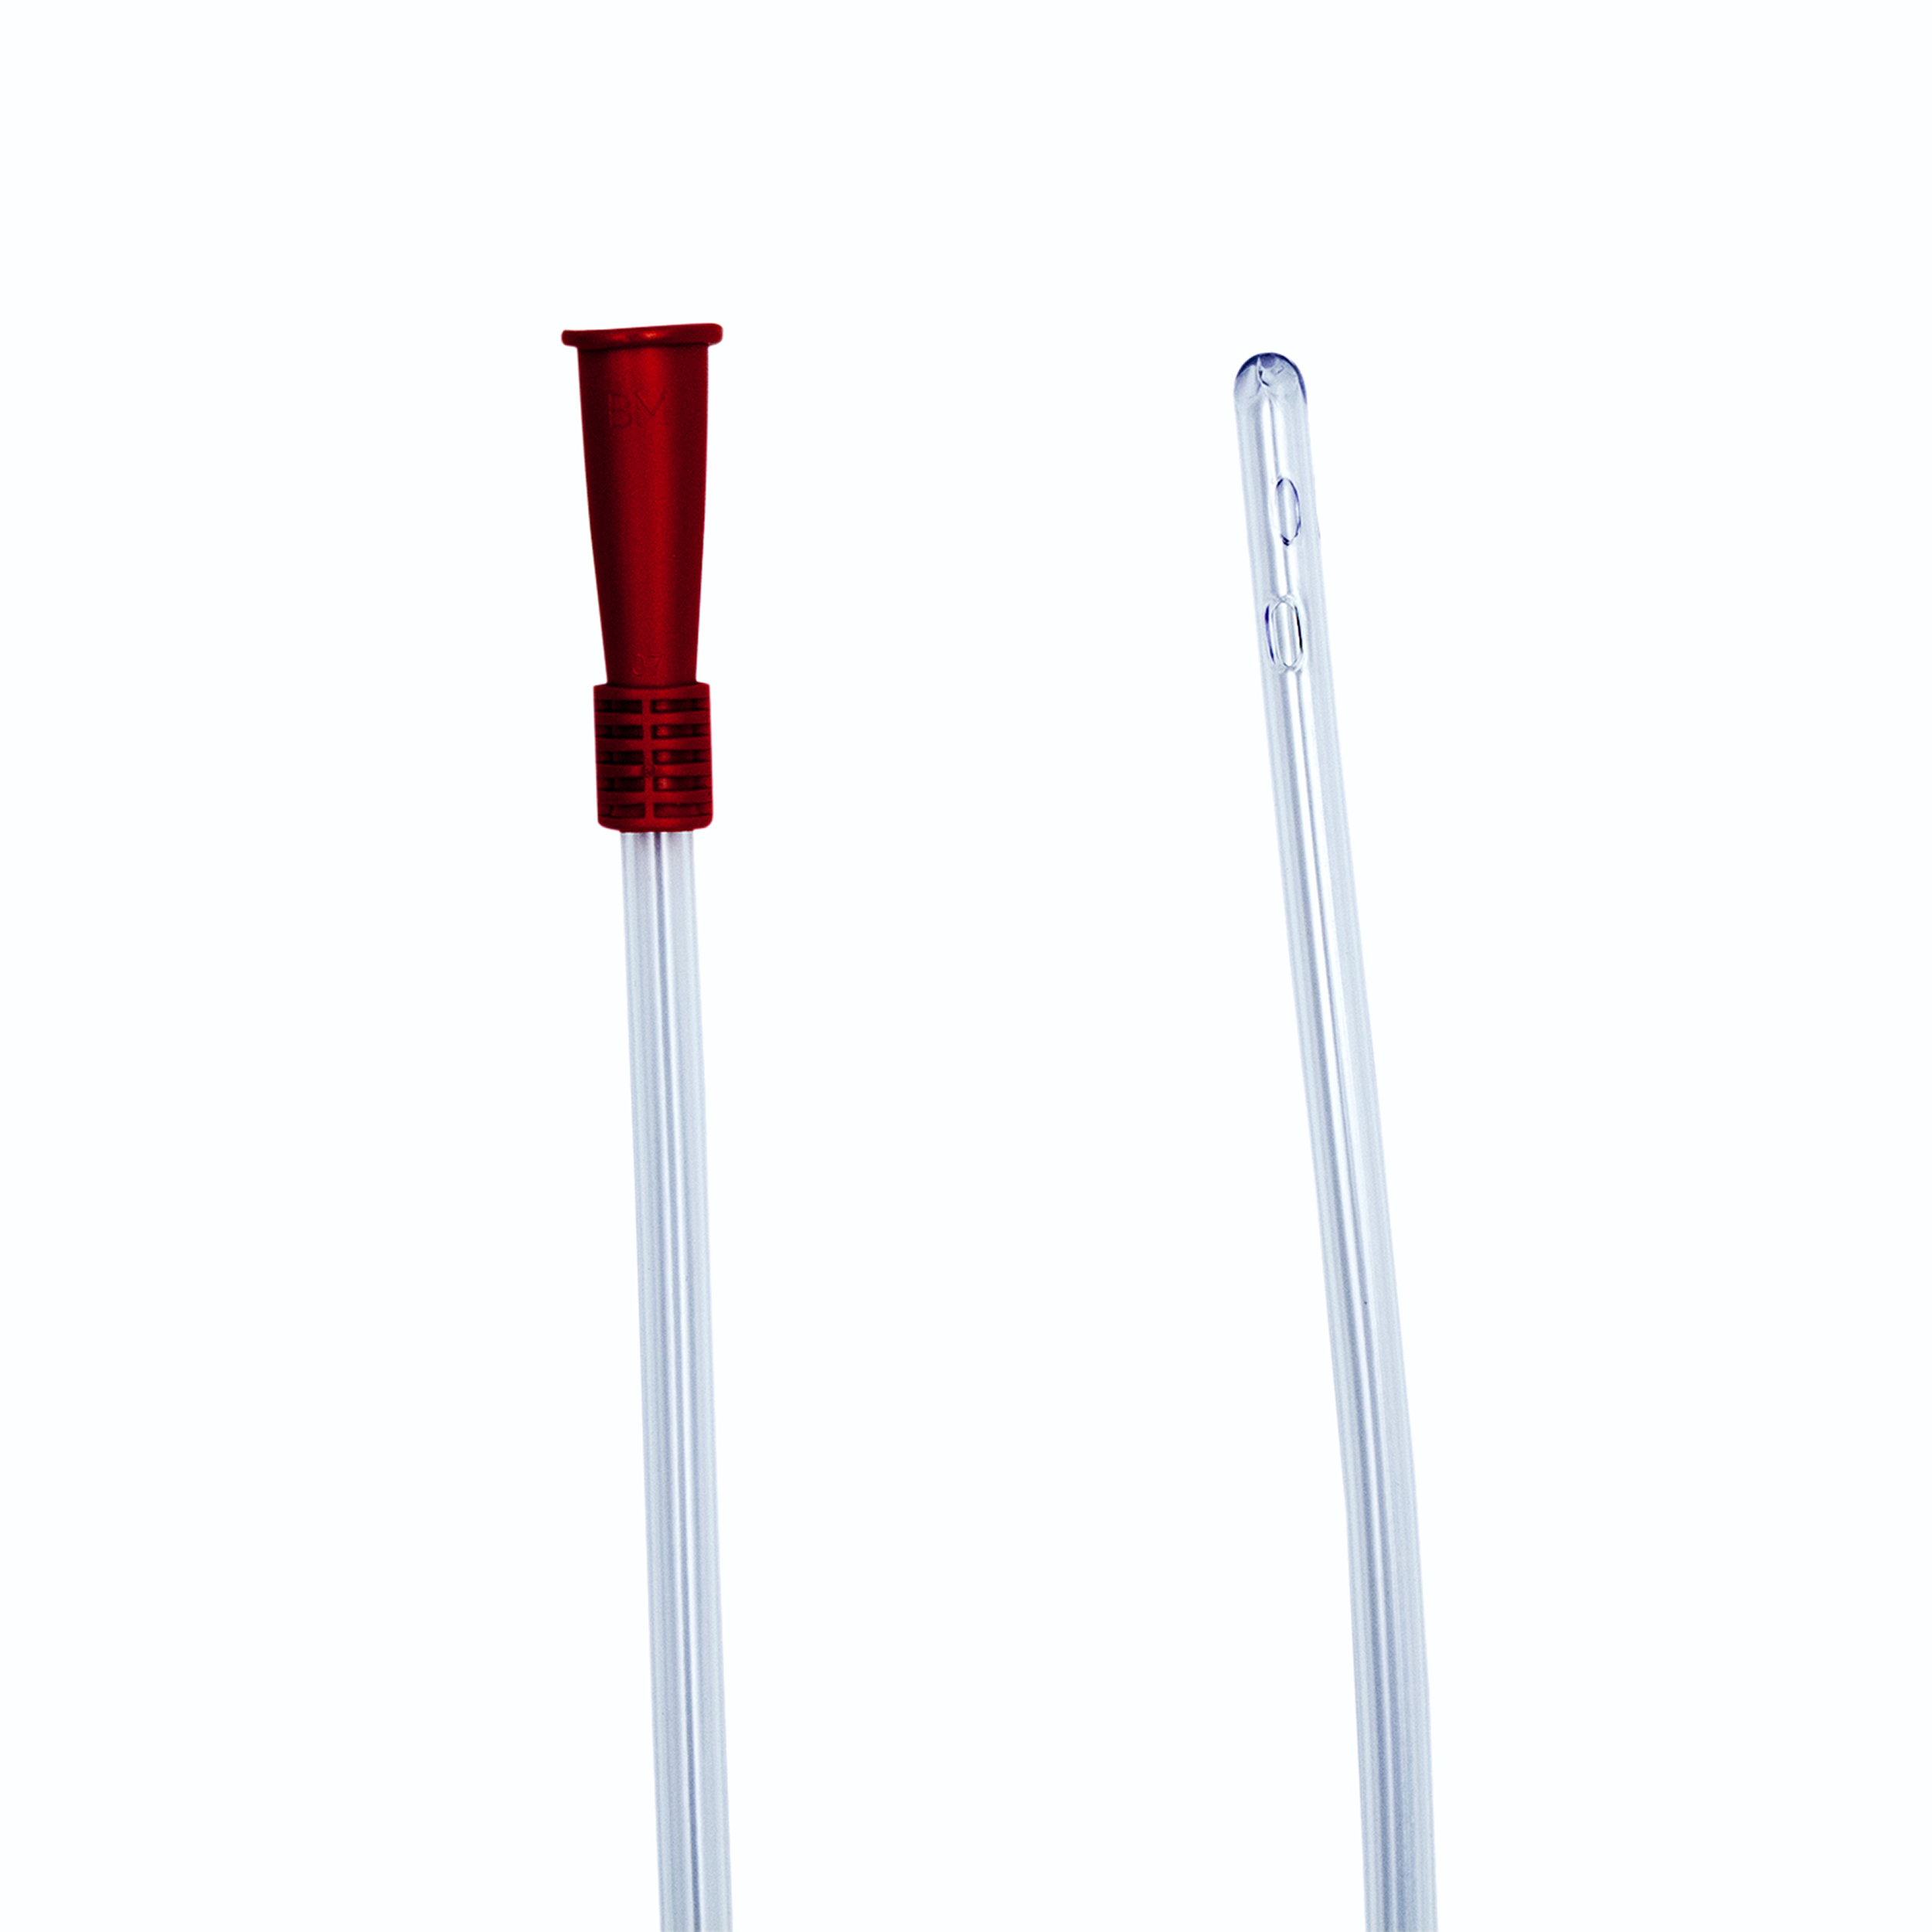 Intermittent Catheter (Male) 18Fr, Sterile Red